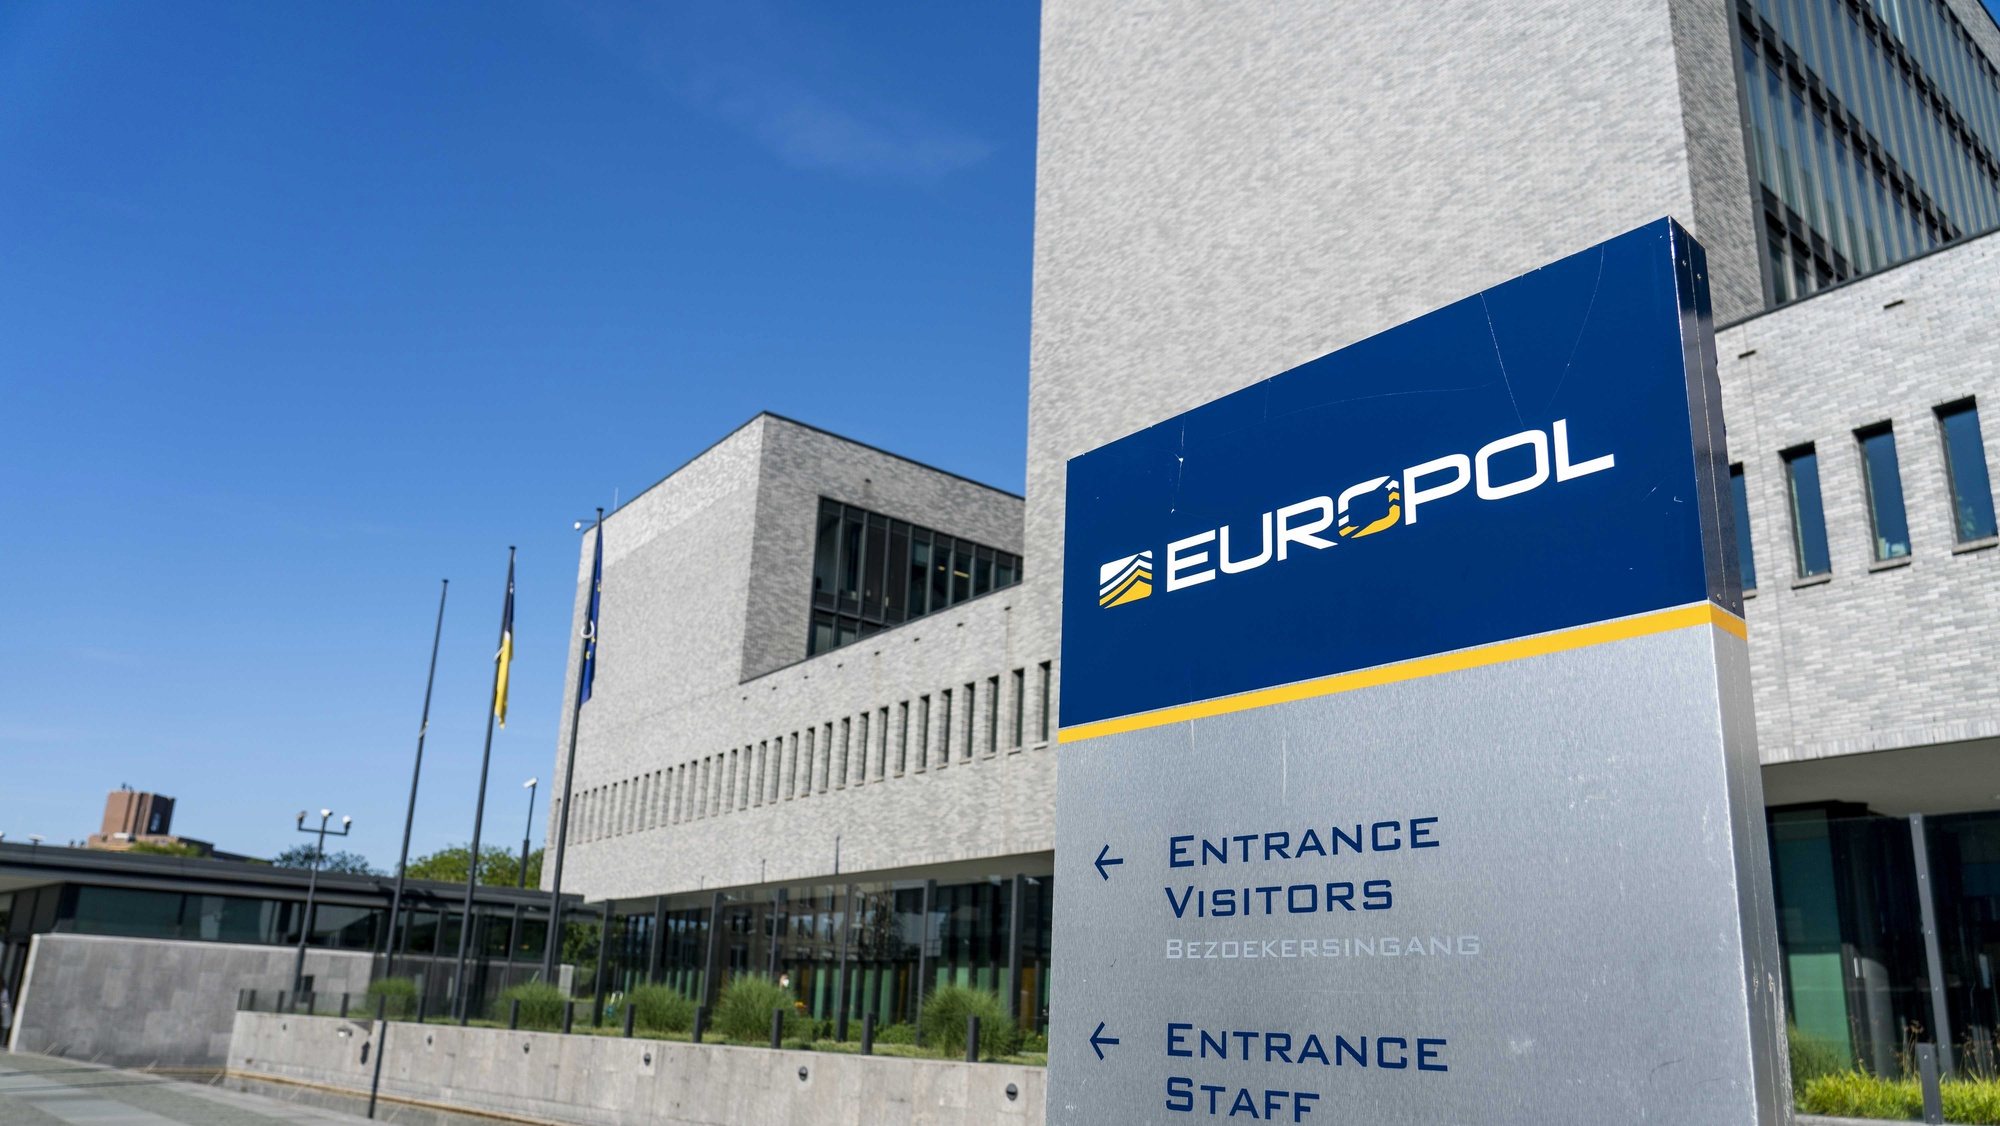 epa09254493 An exterior view of the Europol headquarters in The Hague, the Netherlands, 08 June 2021, prior to a Europol&#039;s press conference on one of the largest and most sophisticated law enforcement operations to date in the fight against encrypted criminal activities that resulted in the arrest of more than 800 people. According to a statement by the Europol, the US Federal Bureau of Investigation (FBI), the Dutch National Police, the Swedish Police Authority, in cooperation with the US Drug Enforcement Administration (DEA) and 16 other countries have carried out the investigations with the support of Europol.  EPA/JERRY LAMPEN